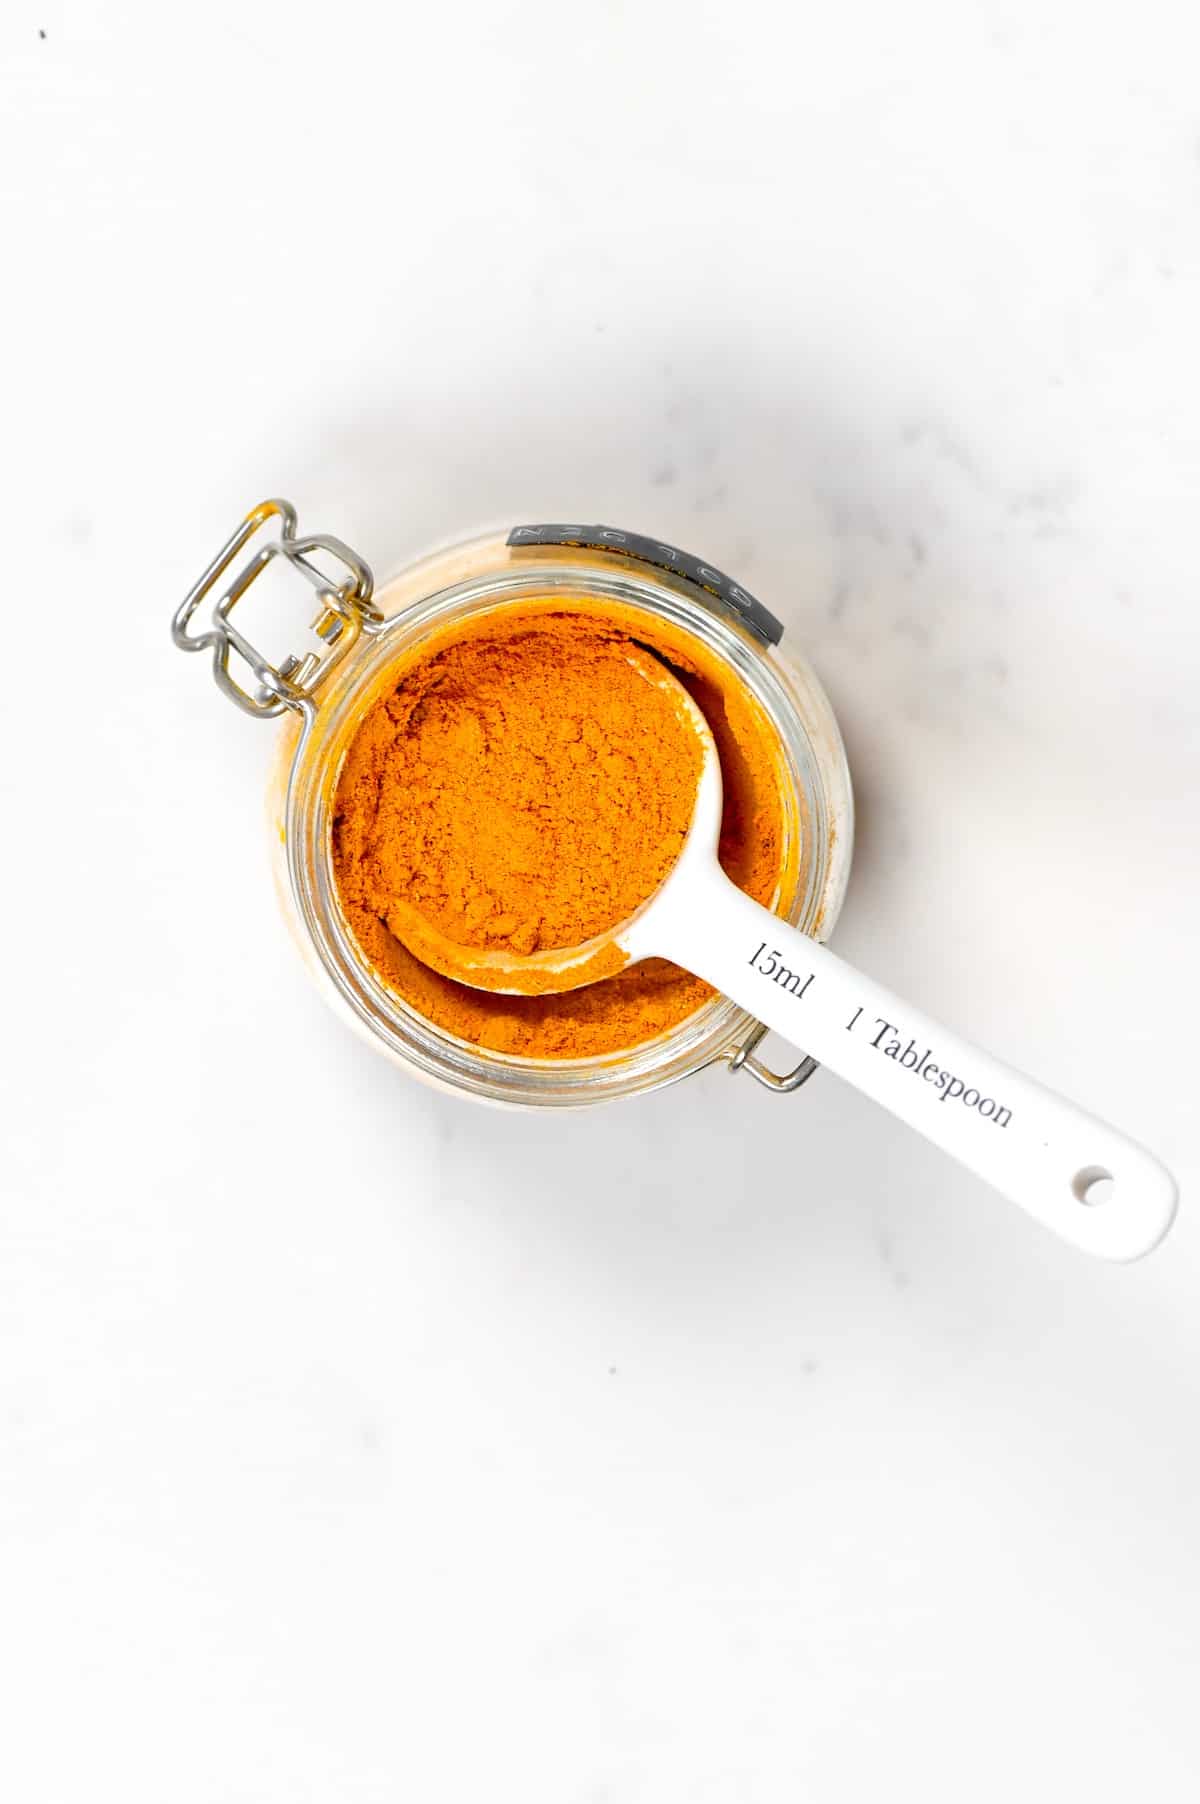 Turmeric mix in a jar with a measuring spoon